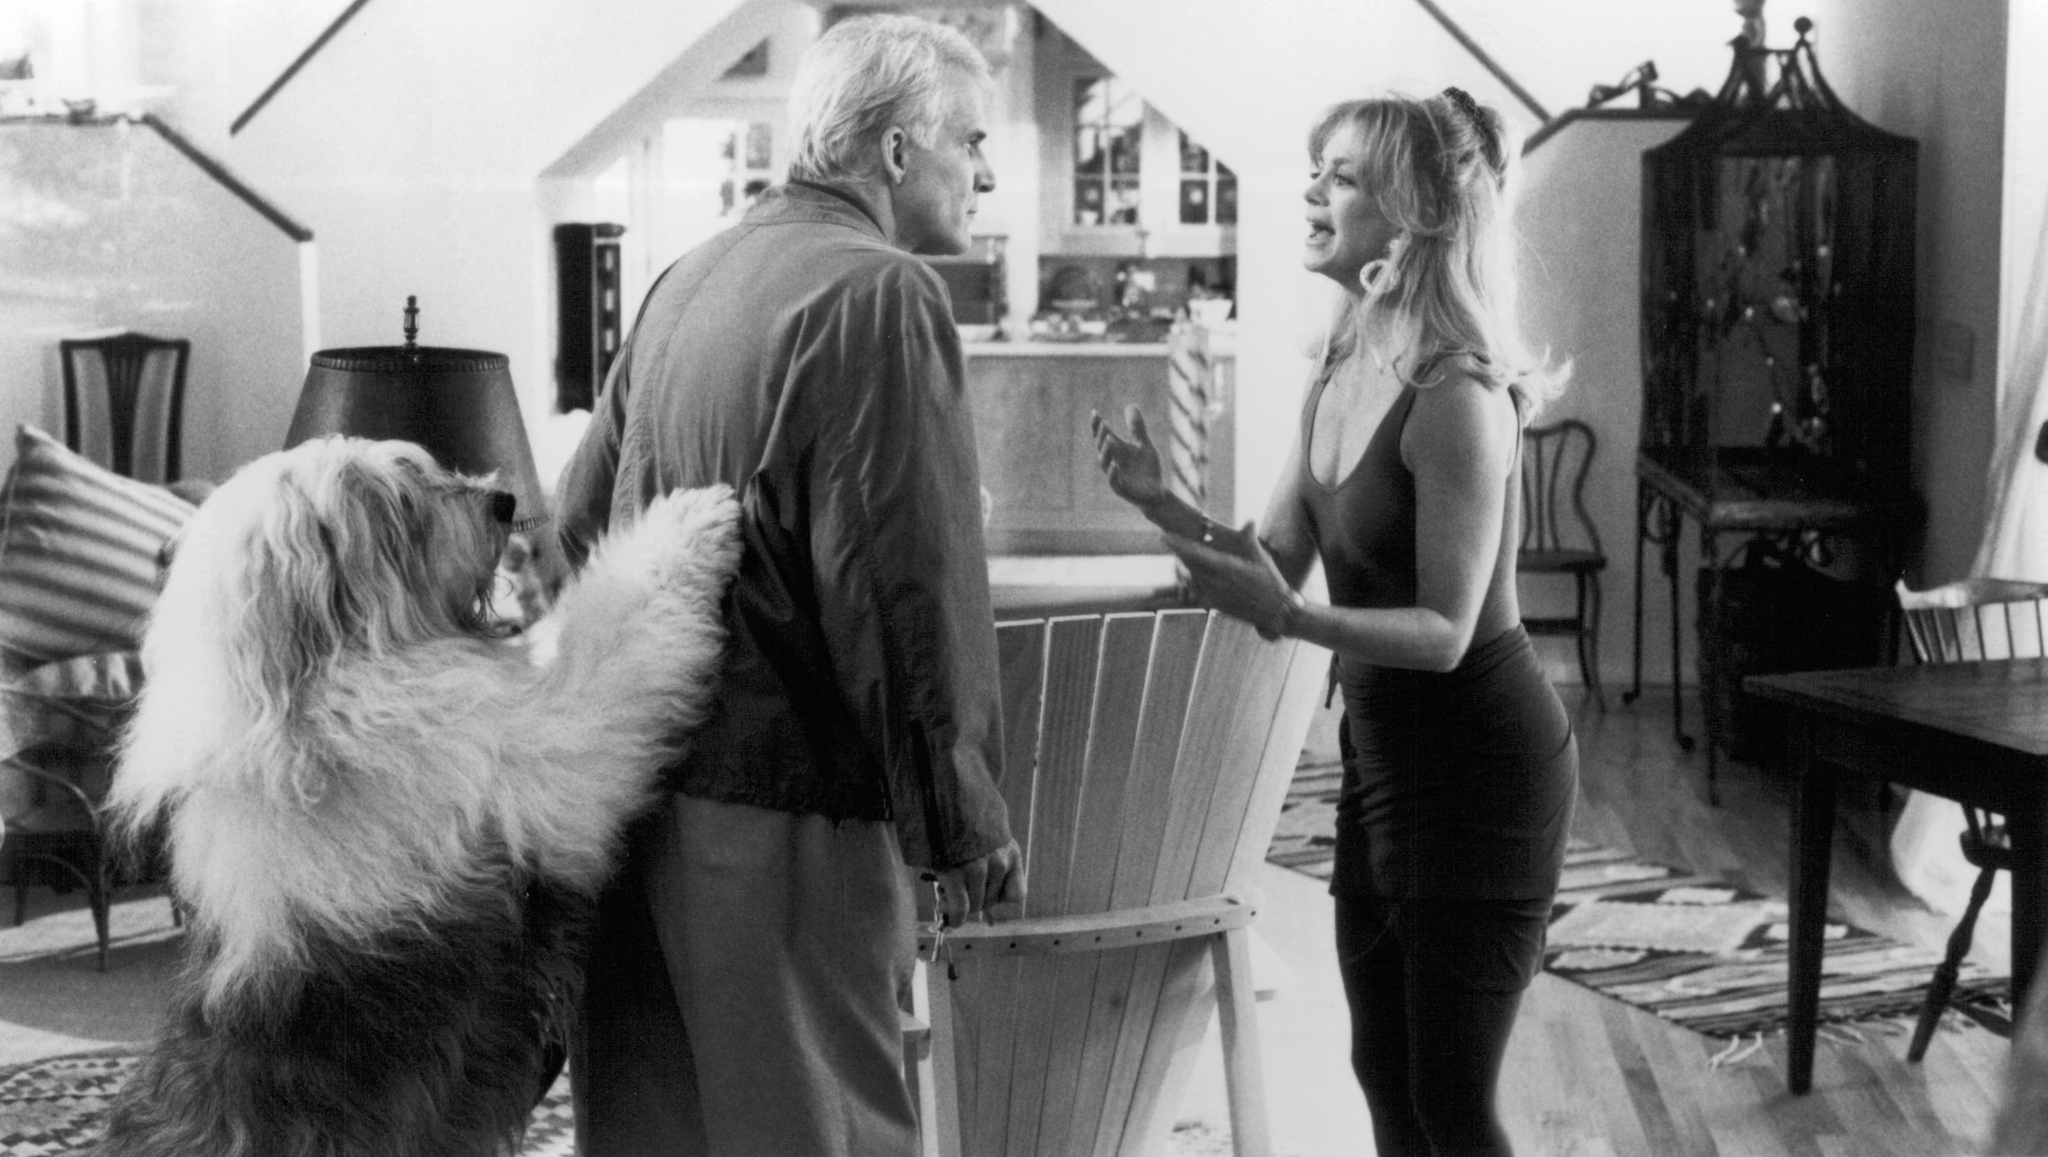 Still of Steve Martin and Goldie Hawn in HouseSitter (1992)